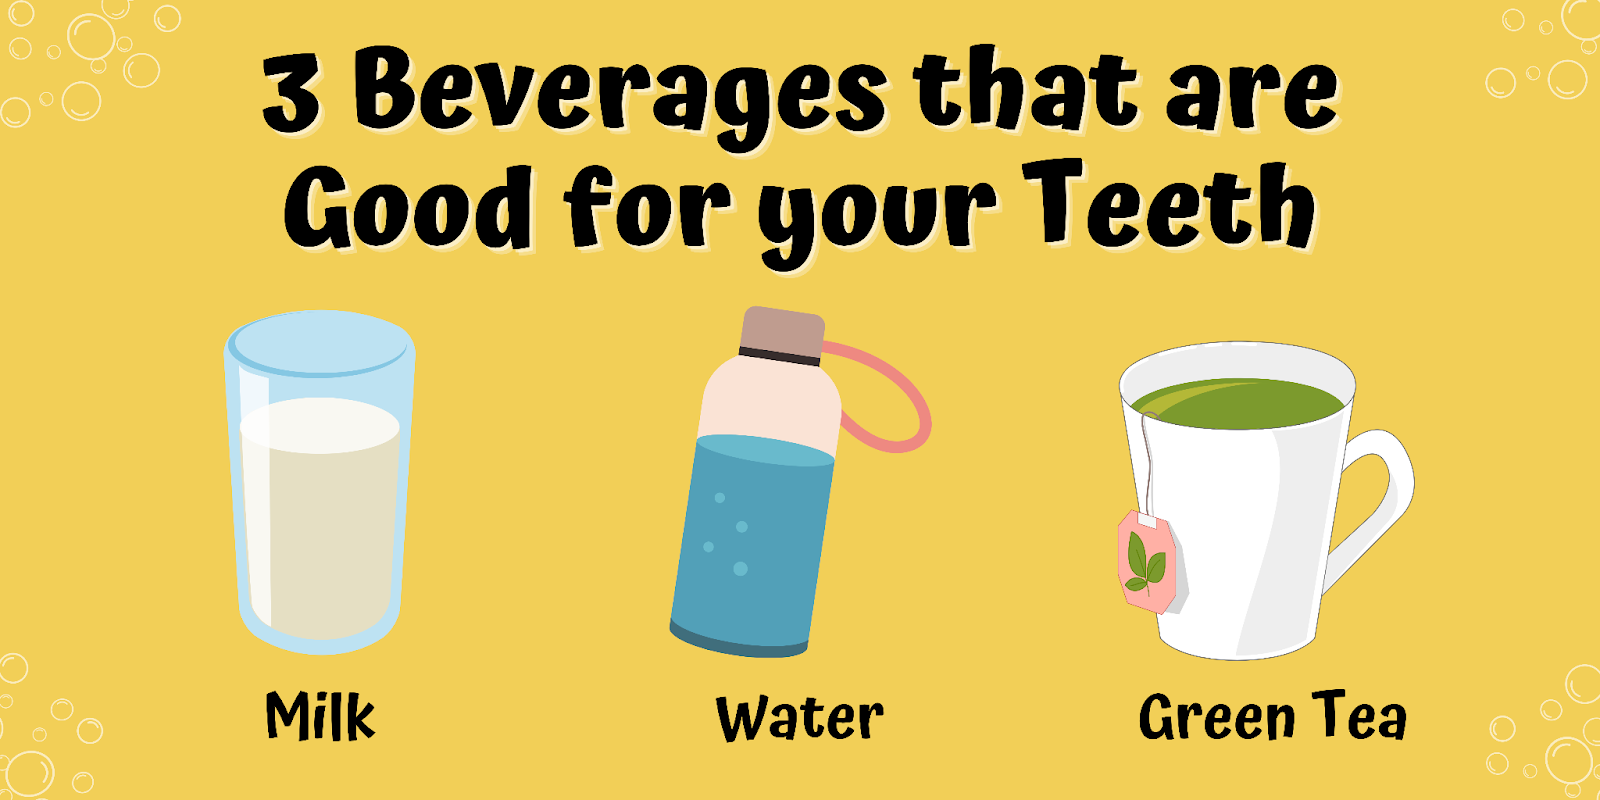 3 Beverages that are Good for your Teeth